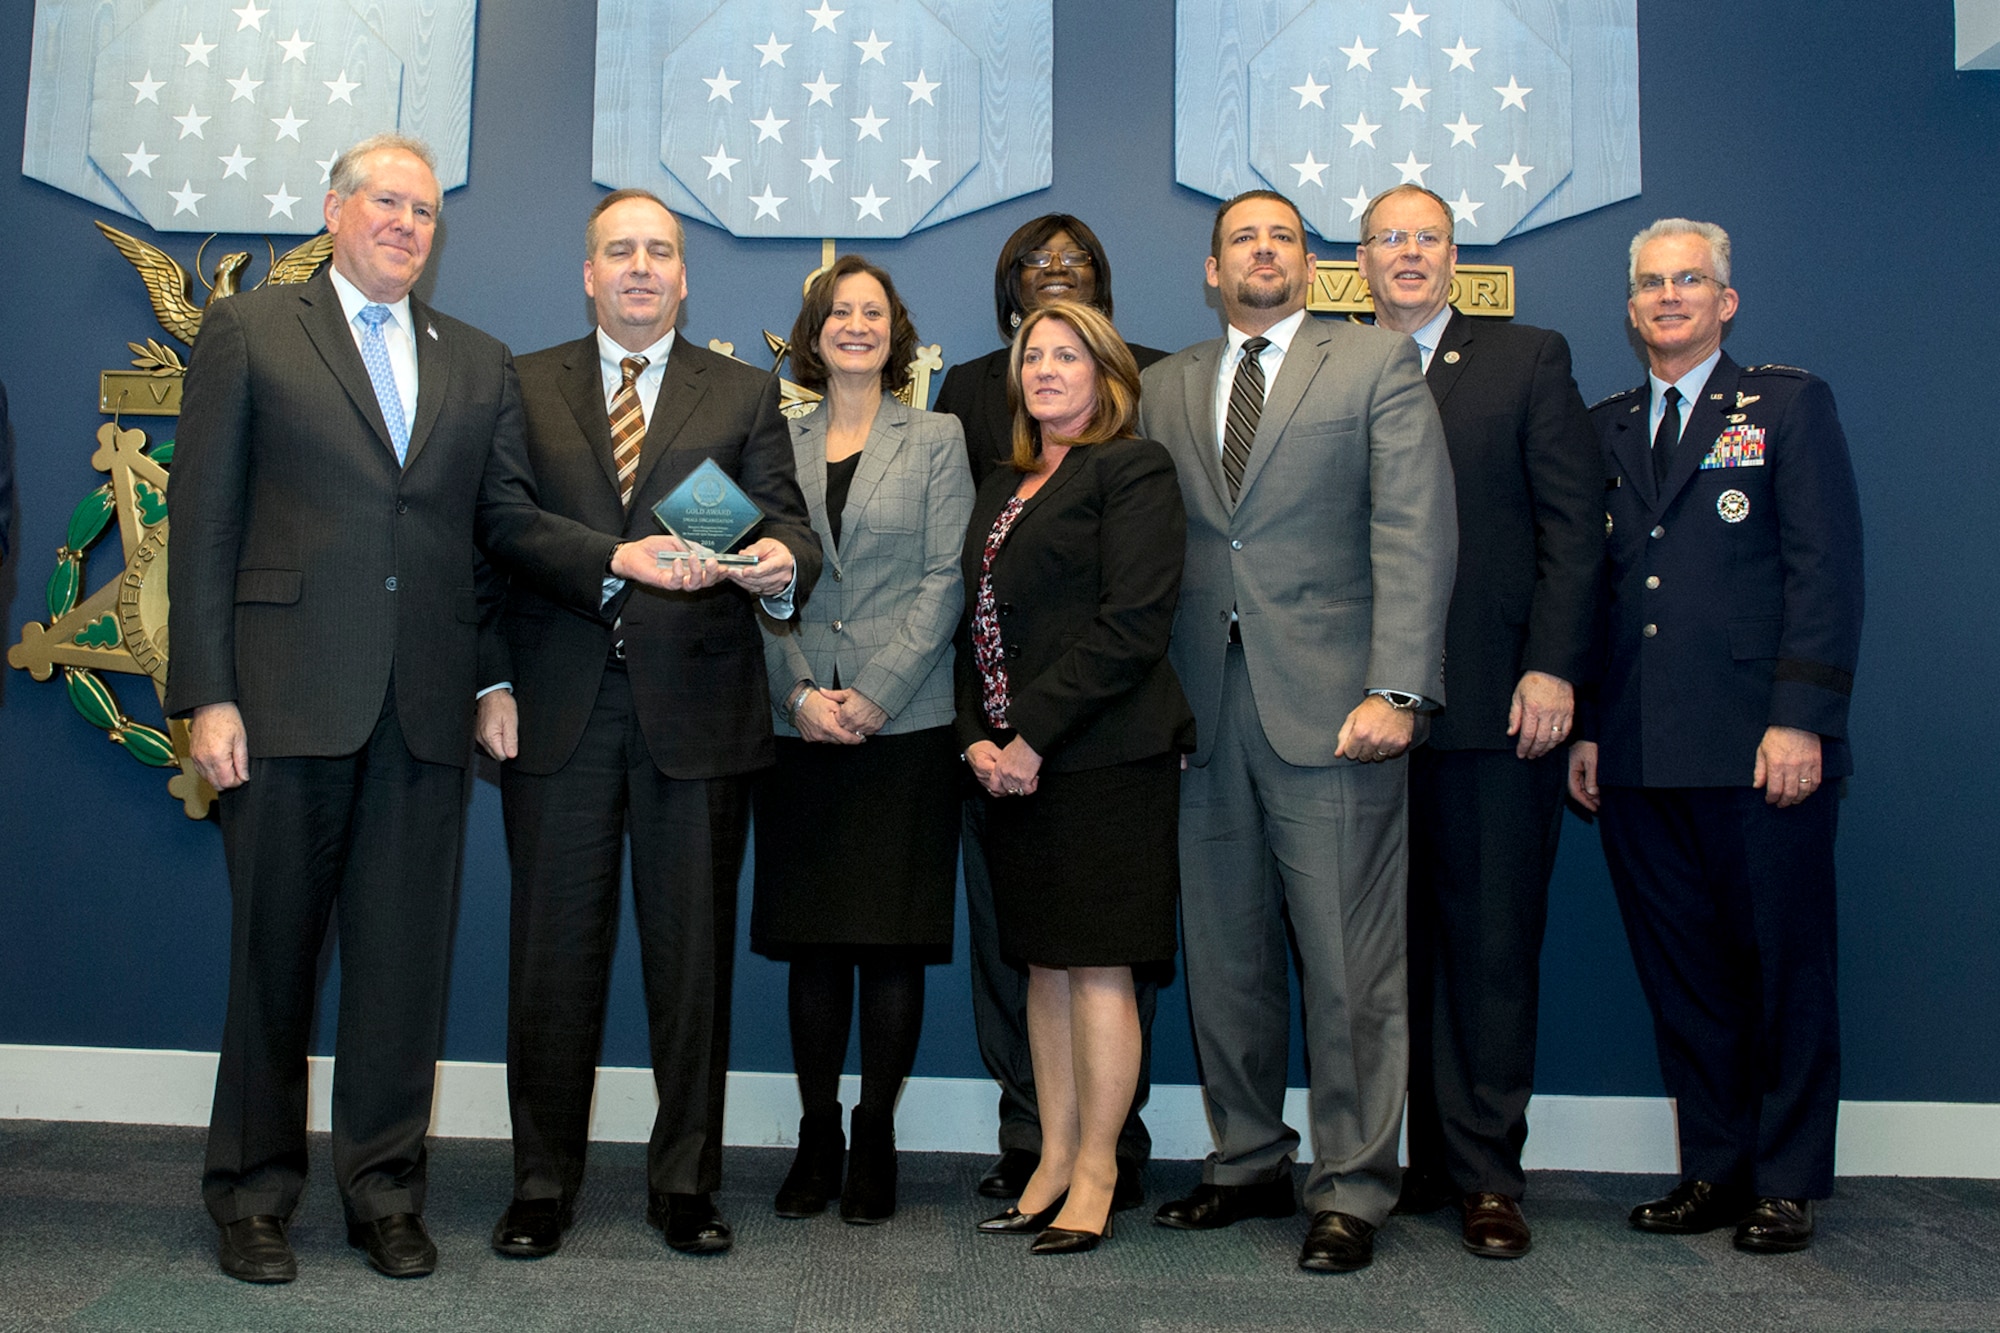 Frank Kendall, Under Secretary of Defense for Acquisition, left, presents members of the Resource Management Division with the Defense Acquisition Resource Management Award during a ceremony at the Pentagon on Dec. 8, 2016. Standing with them are Vice Chairman of the Joint Chiefs of Staff Gen. Paul J. Selva right, and Deputy Secretary of Defense Bob Work. (DoD photo) 